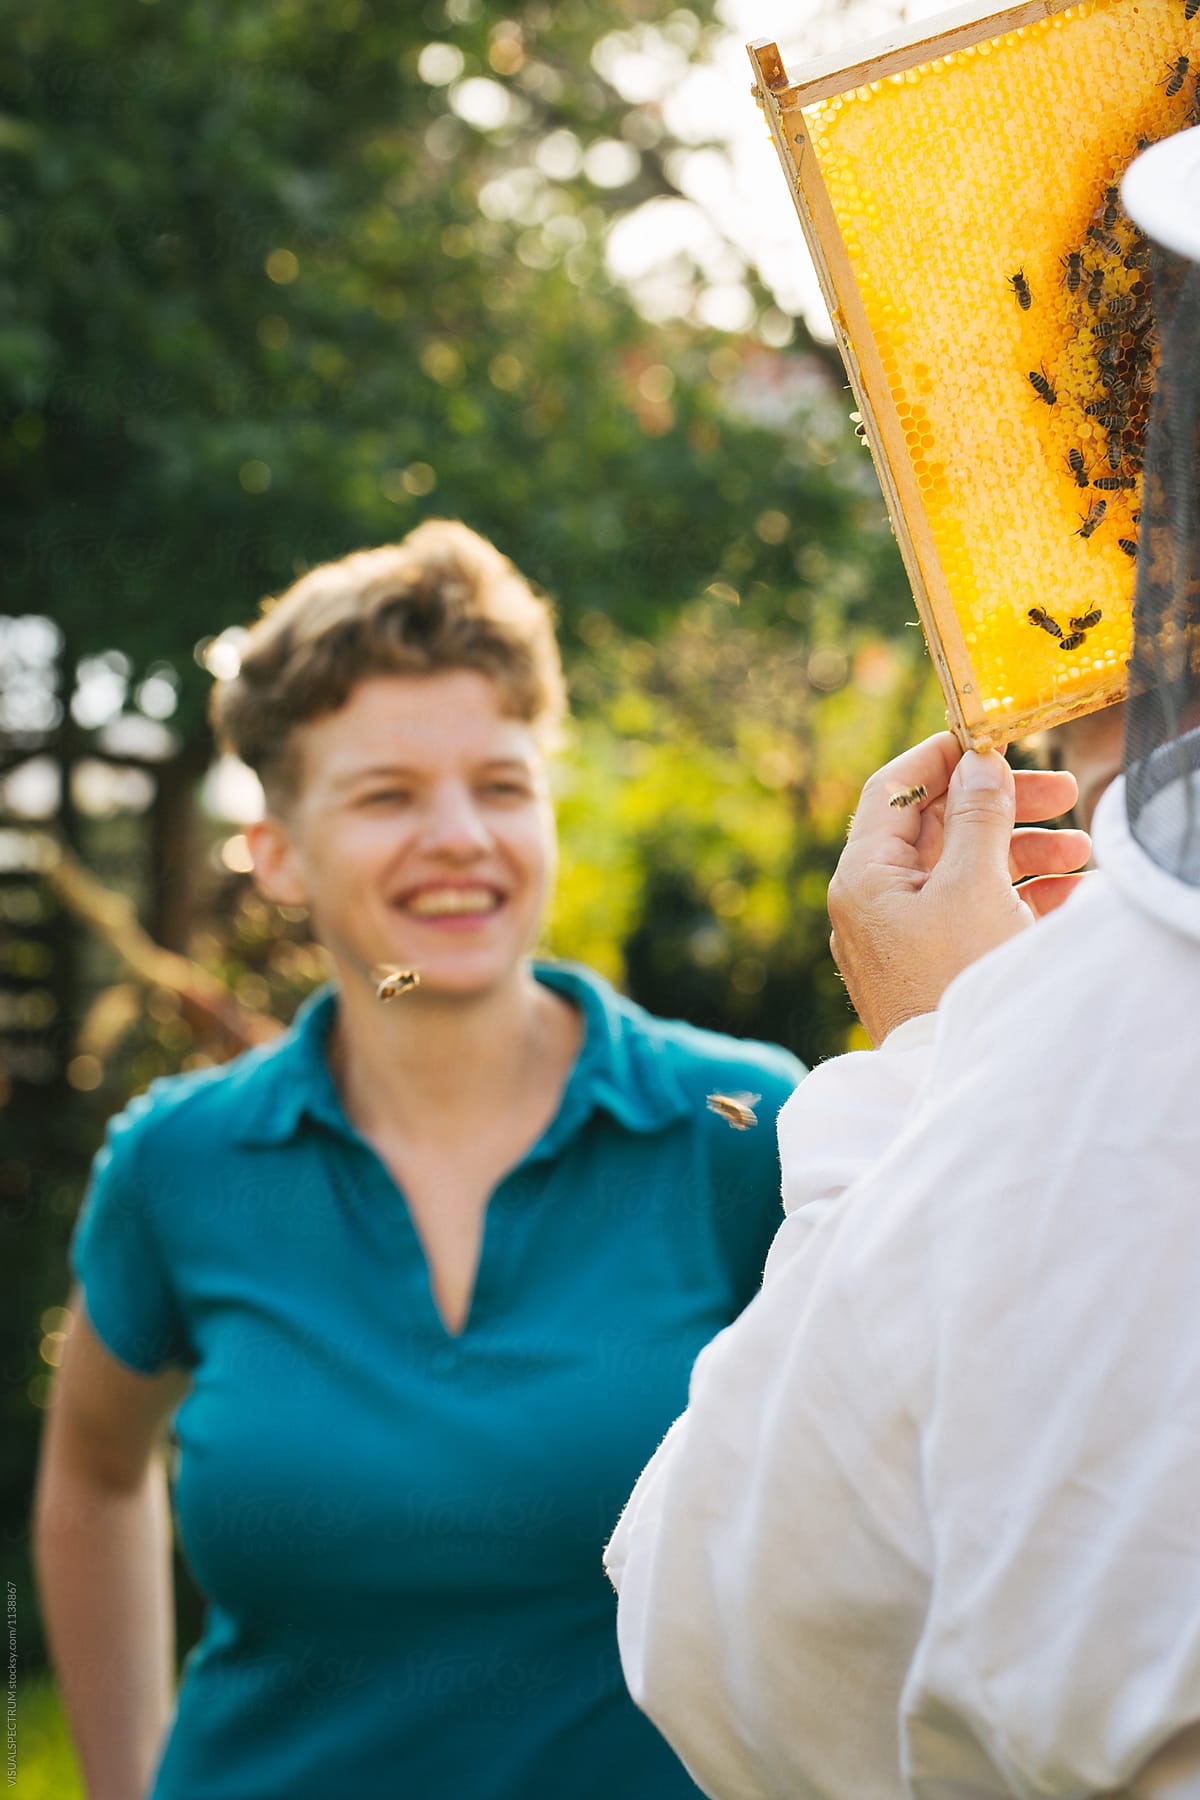 Female Beekeeping Student Smiling at Bee Frame